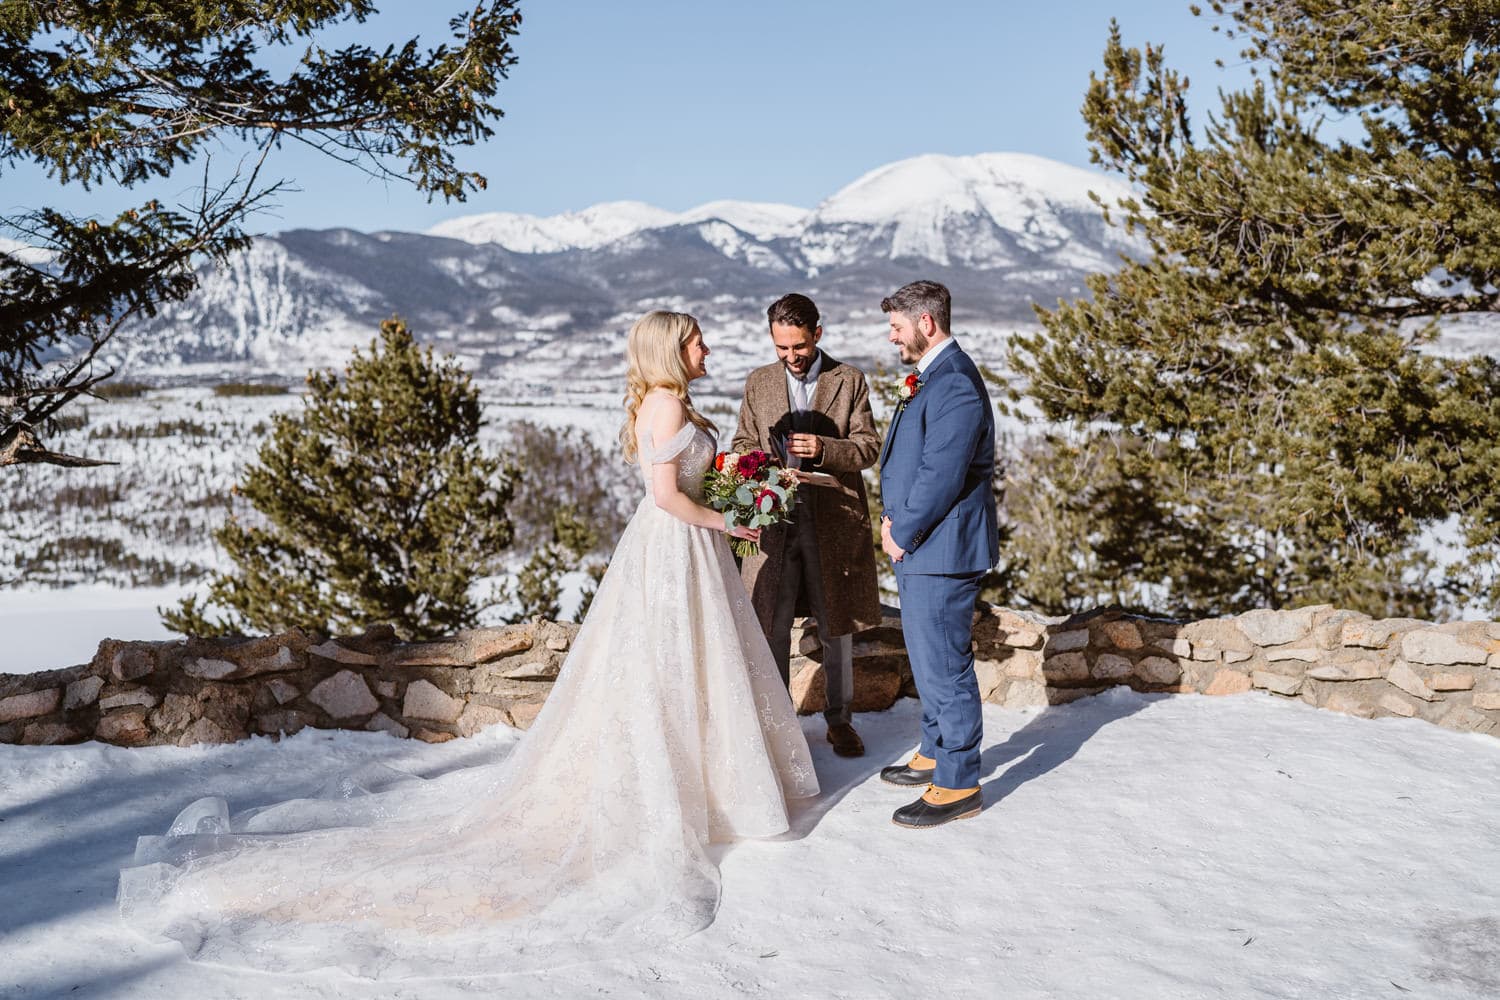 A bride and groom getting married at Sapphire Point in Colorado